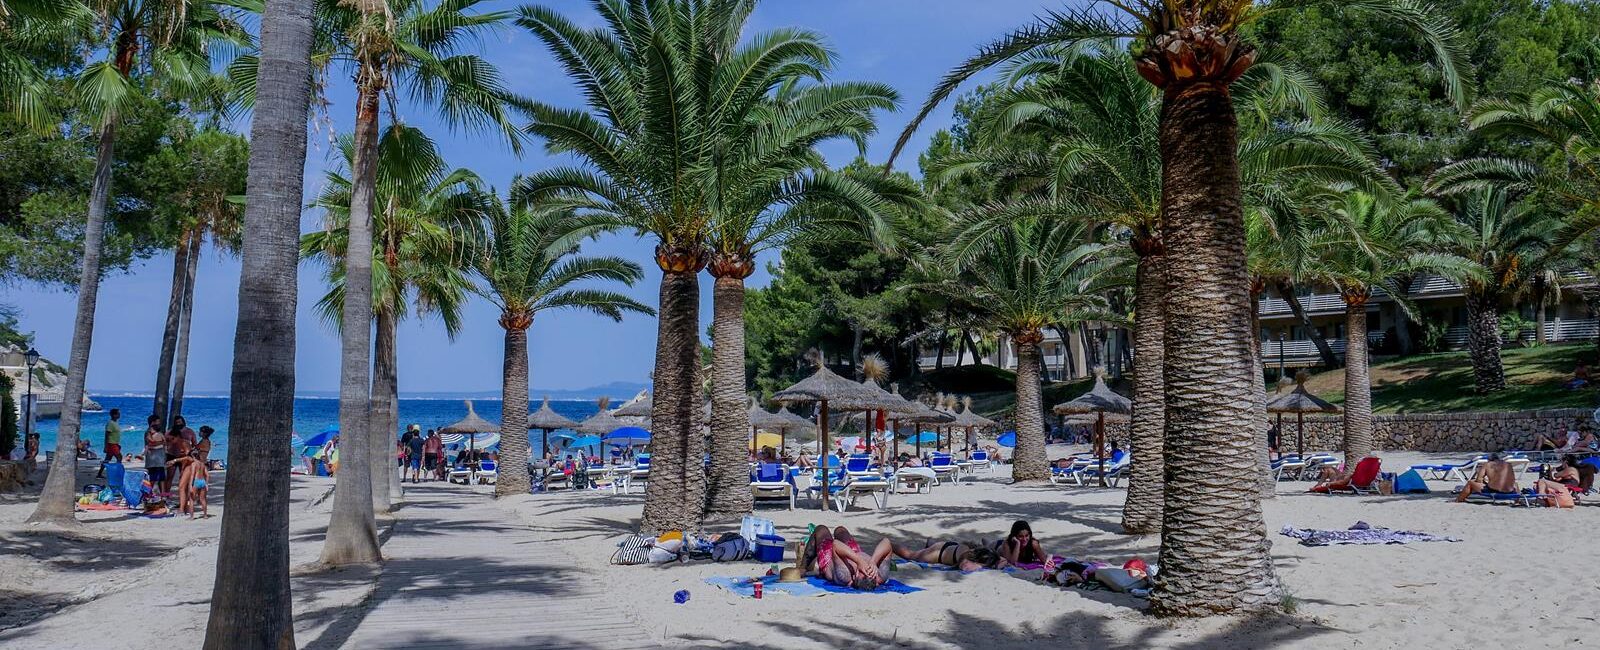 Cala Vinas – one of the beaches with palmtrees in Majorca!